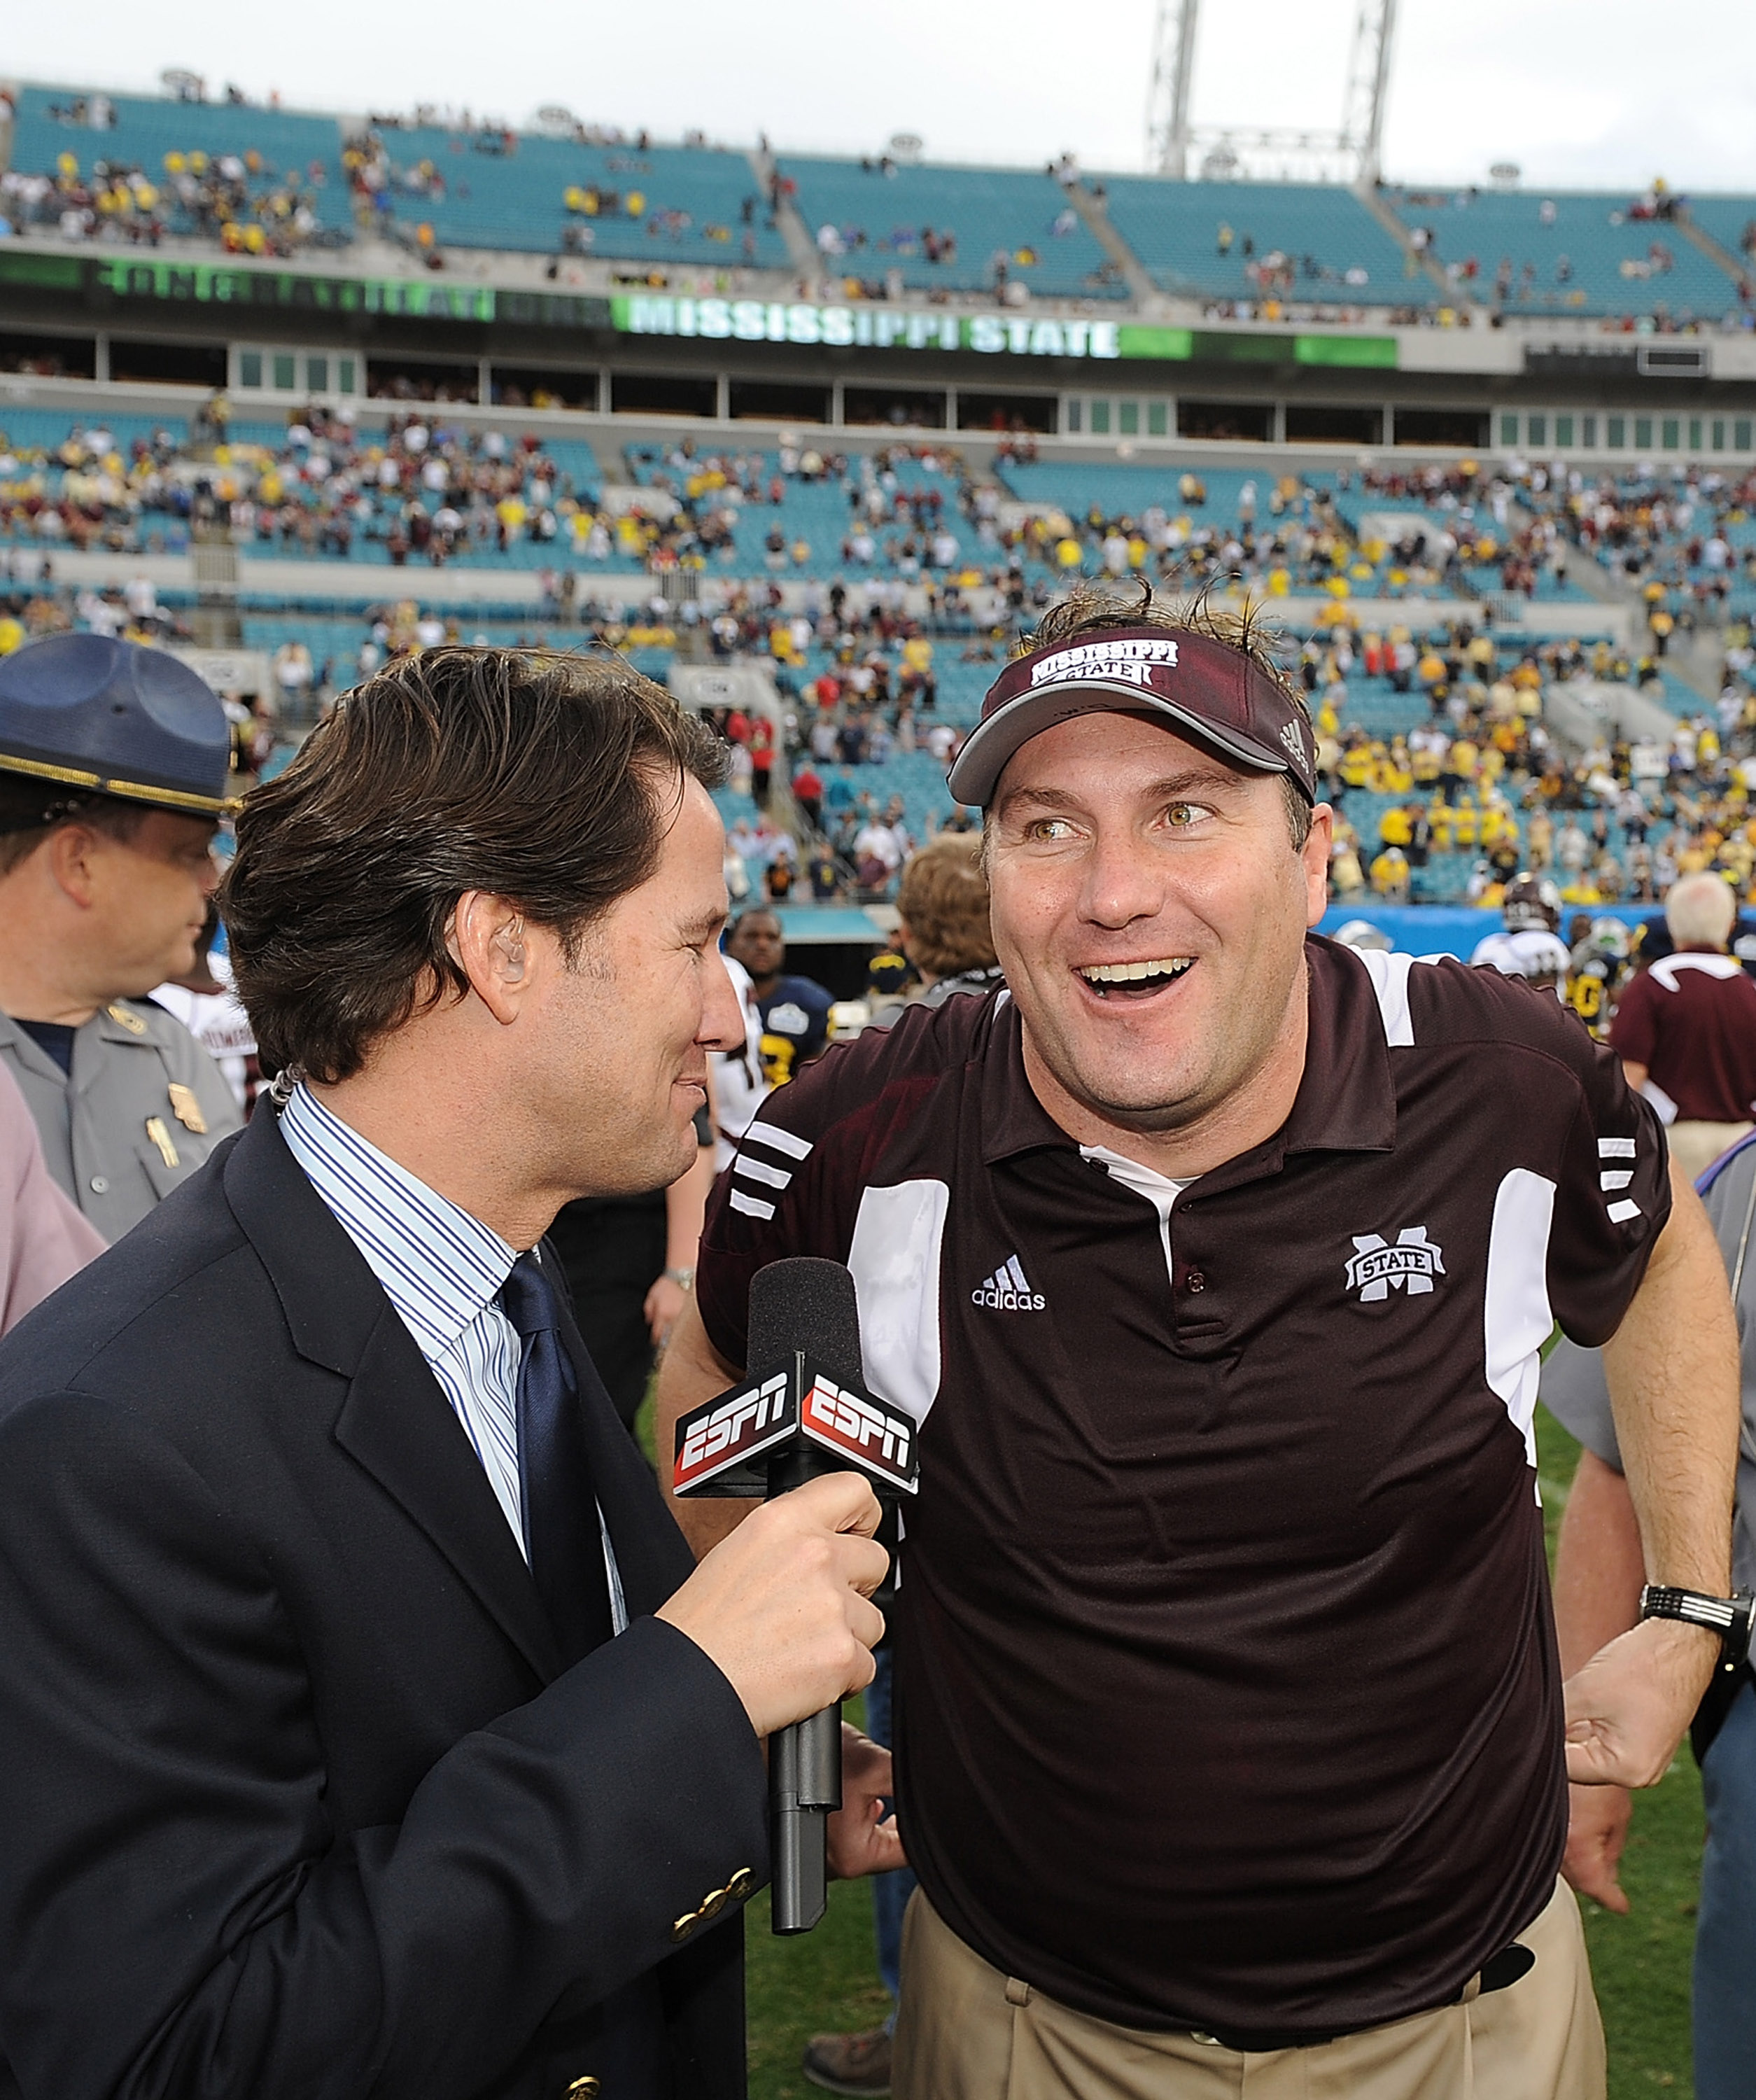 JACKSONVILLE, FL - JANUARY 01:  Mississippi State head coach Dan Mullens is interviewed by ESPN following the Bulldogs victory over the Michigan Wolverines during the Gator Bowl at EverBank Field on January 1, 2011 in Jacksonville, Florida  (Photo by Rick